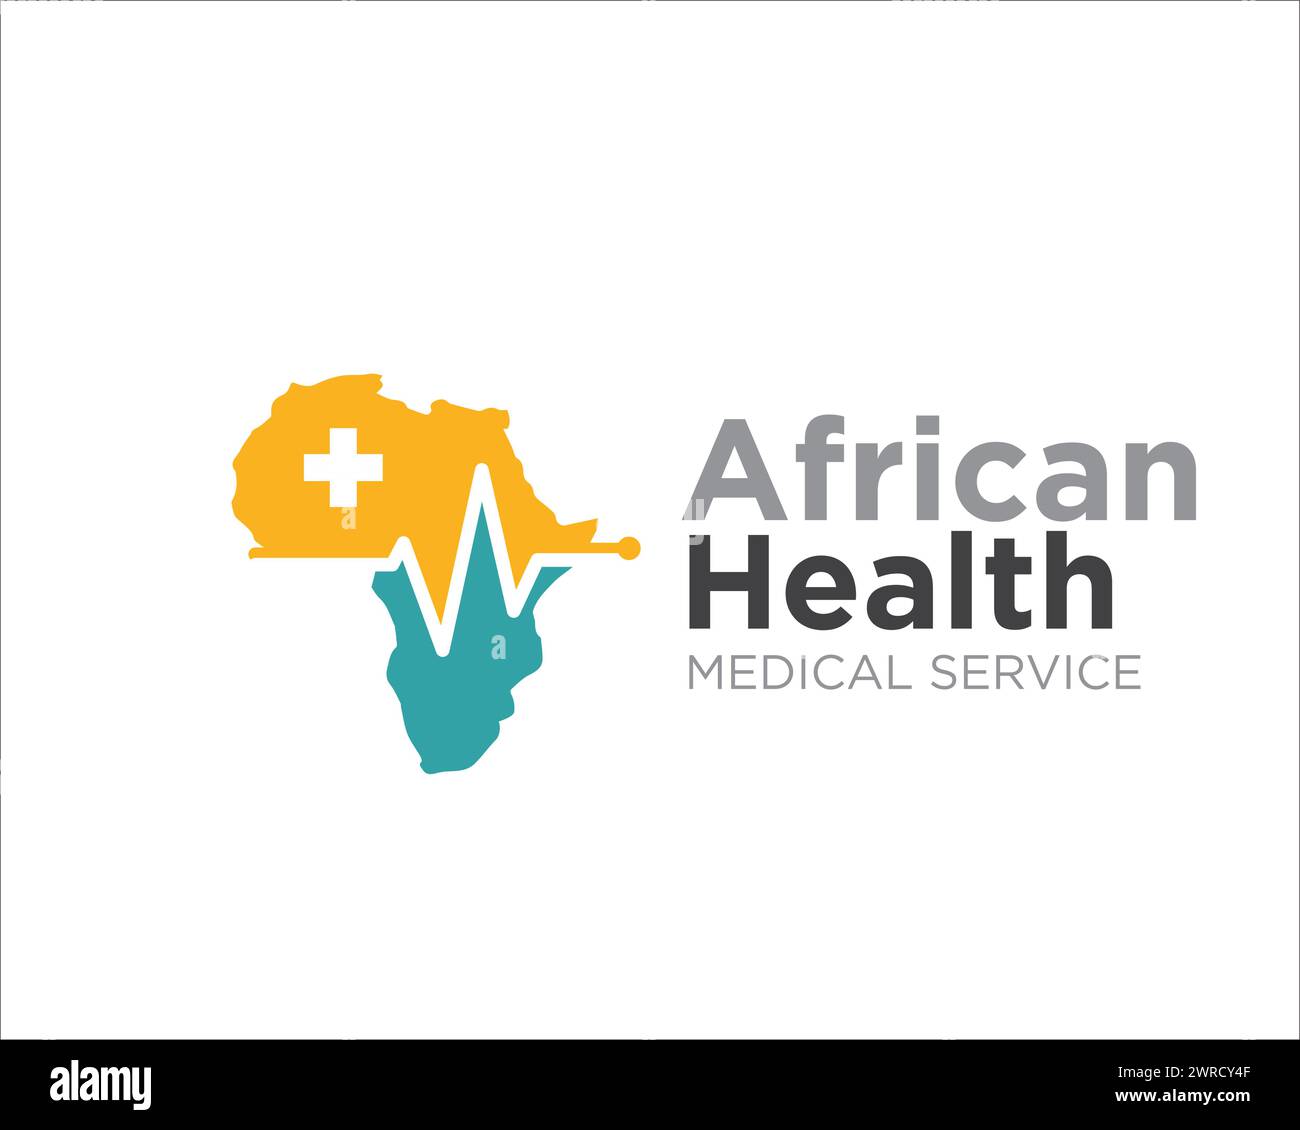 africa health logo designs for medical research and health service Stock Vector